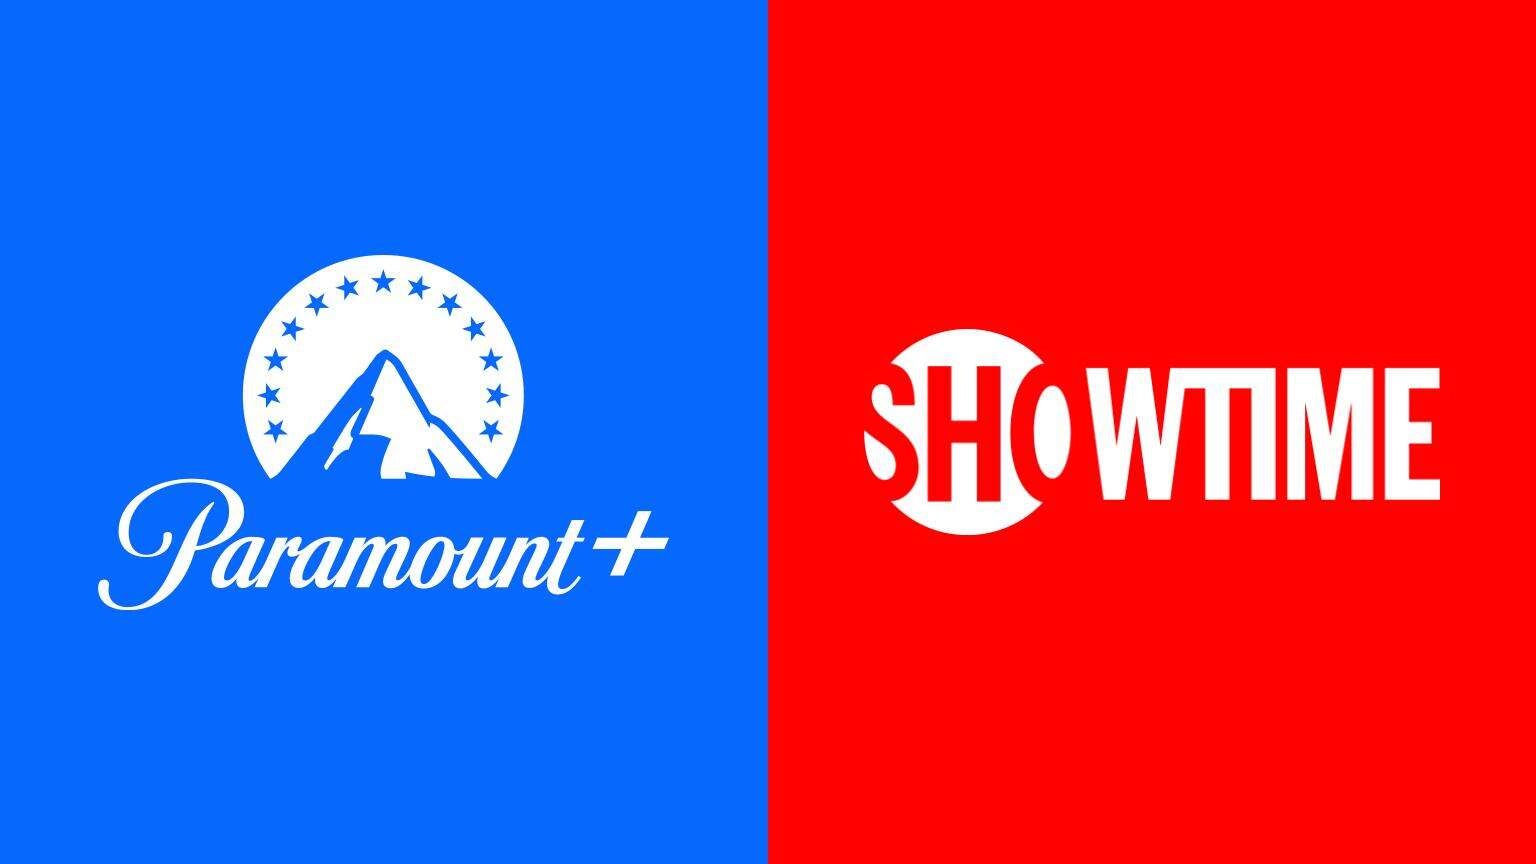 Launches Showtime & Paramount+ Bundle For Just 9.99 a Month